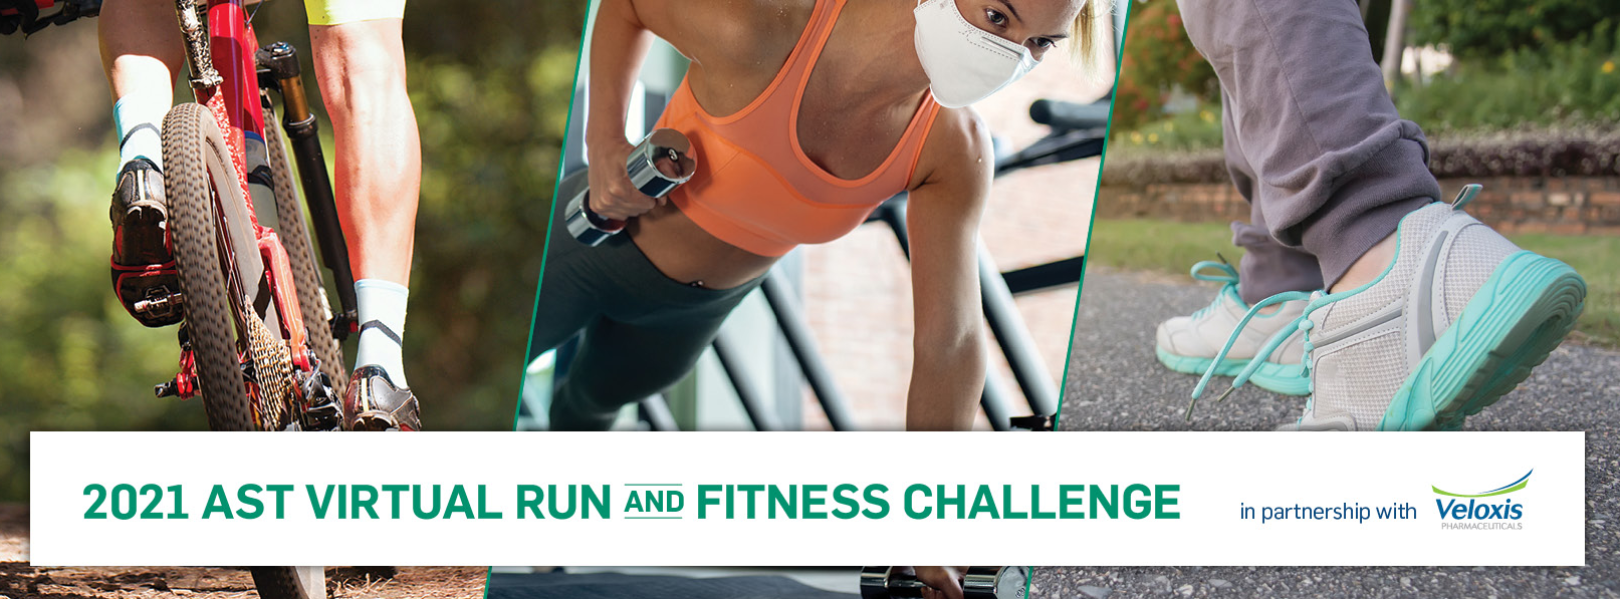 2021 AST Virtual Run and Fitness Challenge